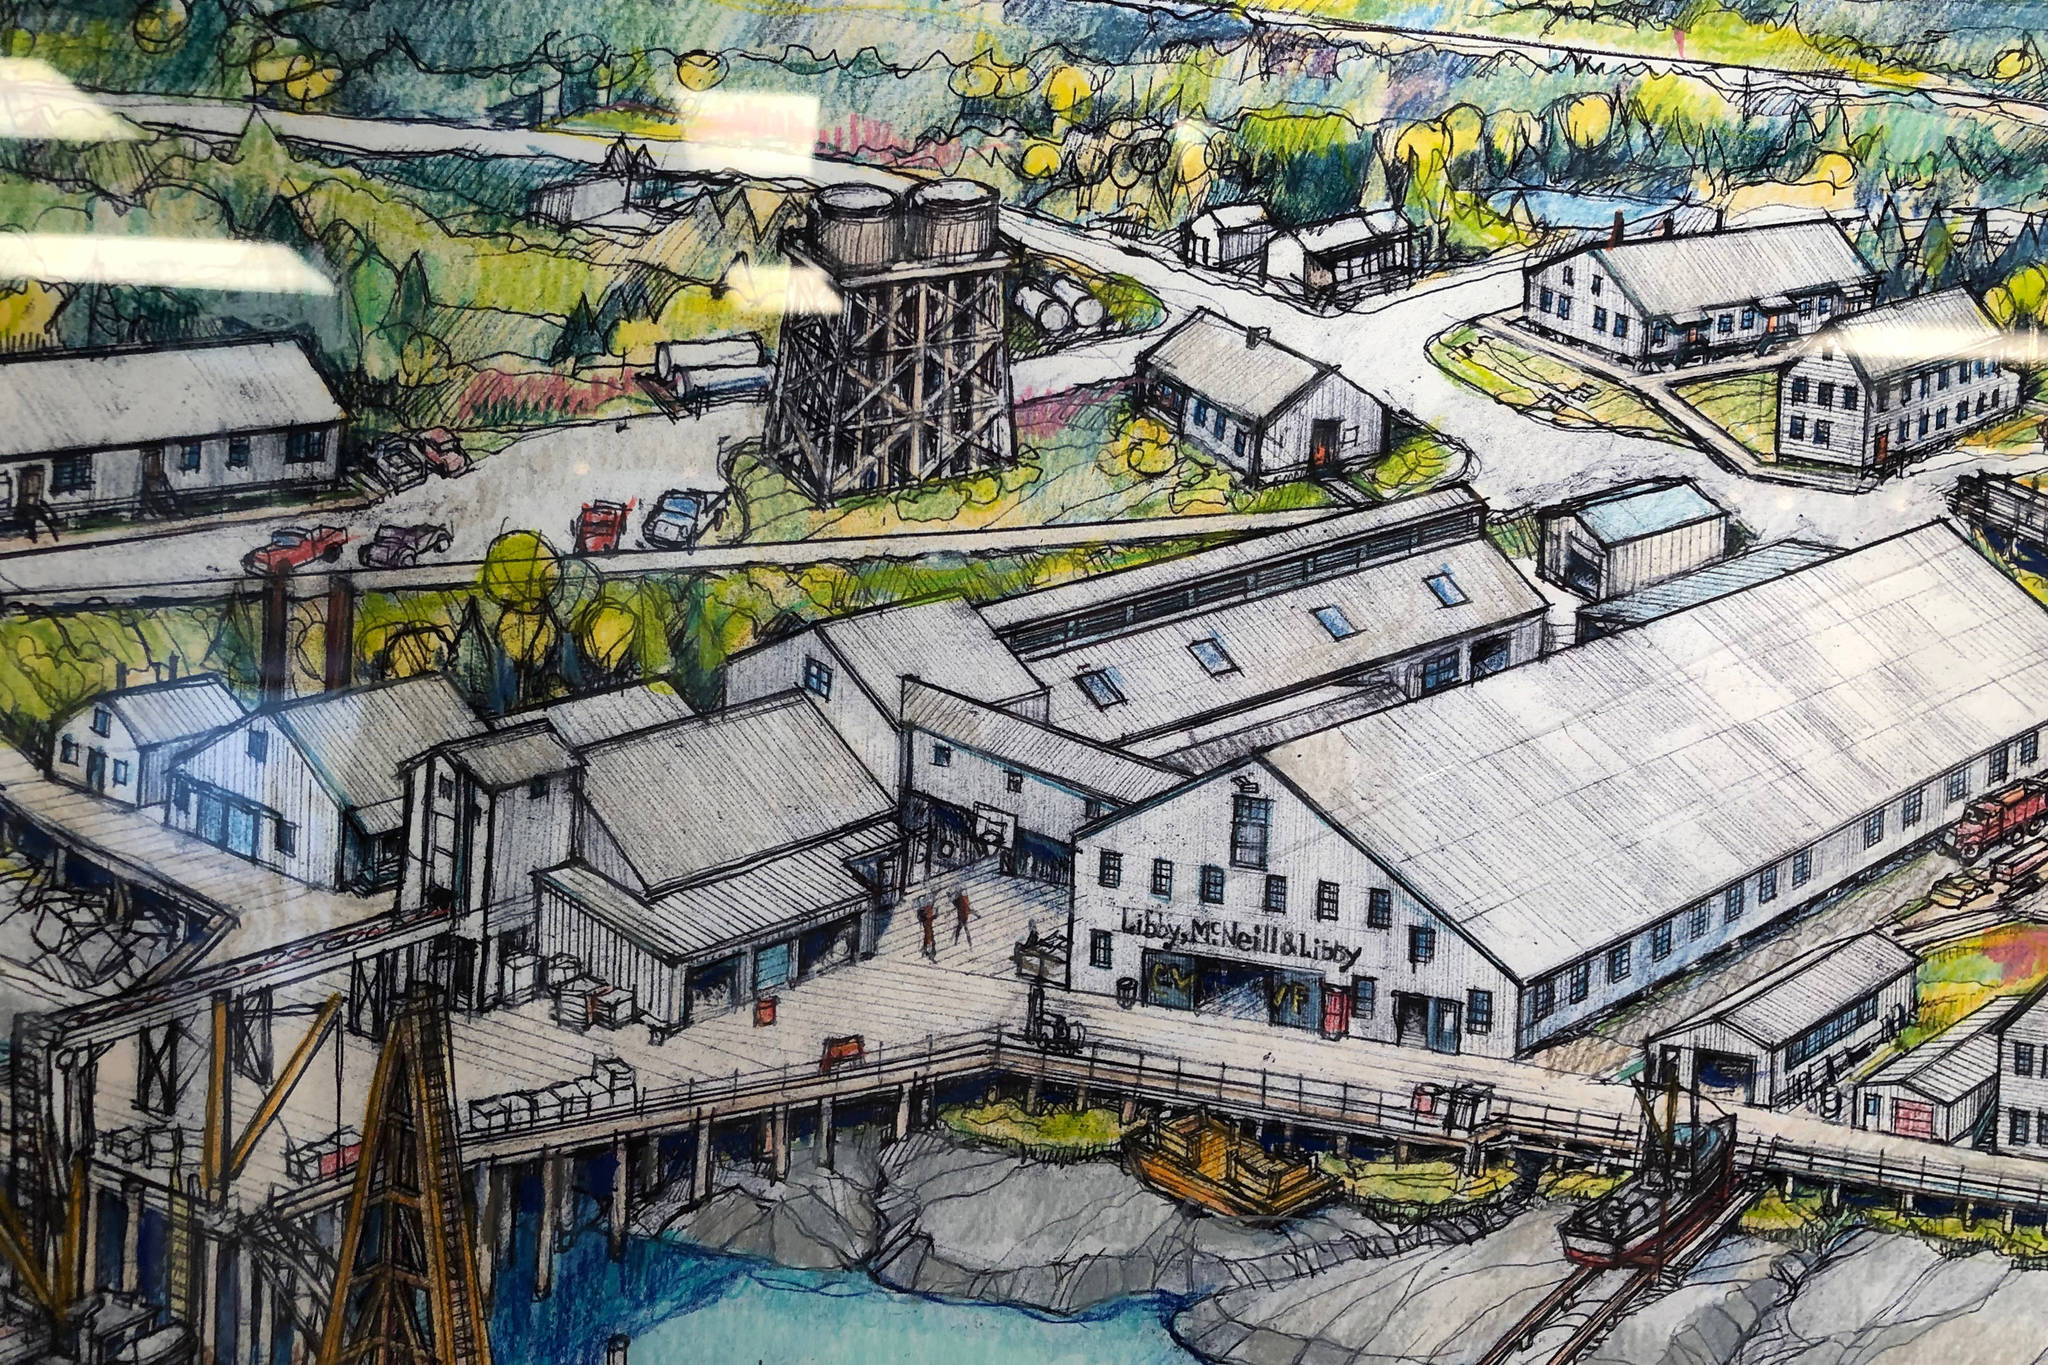 A detailed look at an illustration of old Kenai and the Columbia Ward Fisheries by Thor Evenson at the Kenai Fine Art Center Thursday, June 6, 2019, during the opening reception to the June exhibit Historic Buildings of Kenai. (Photo by Joey Klecka/Peninsula Clarion)